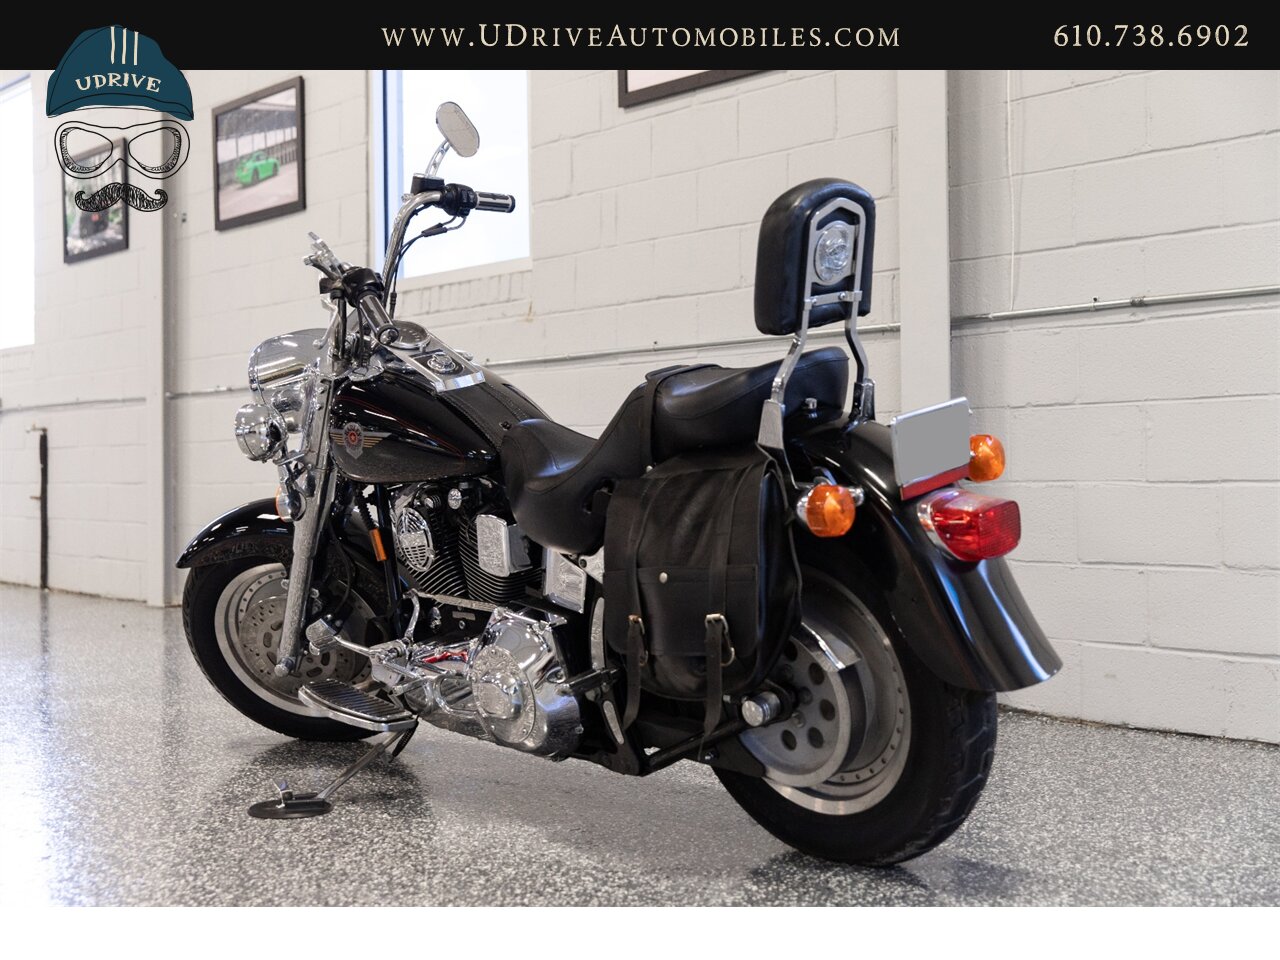 1999 Harley-Davidson Touring FLSTF Fatboy 2k Miles 1 Owner   - Photo 28 - West Chester, PA 19382